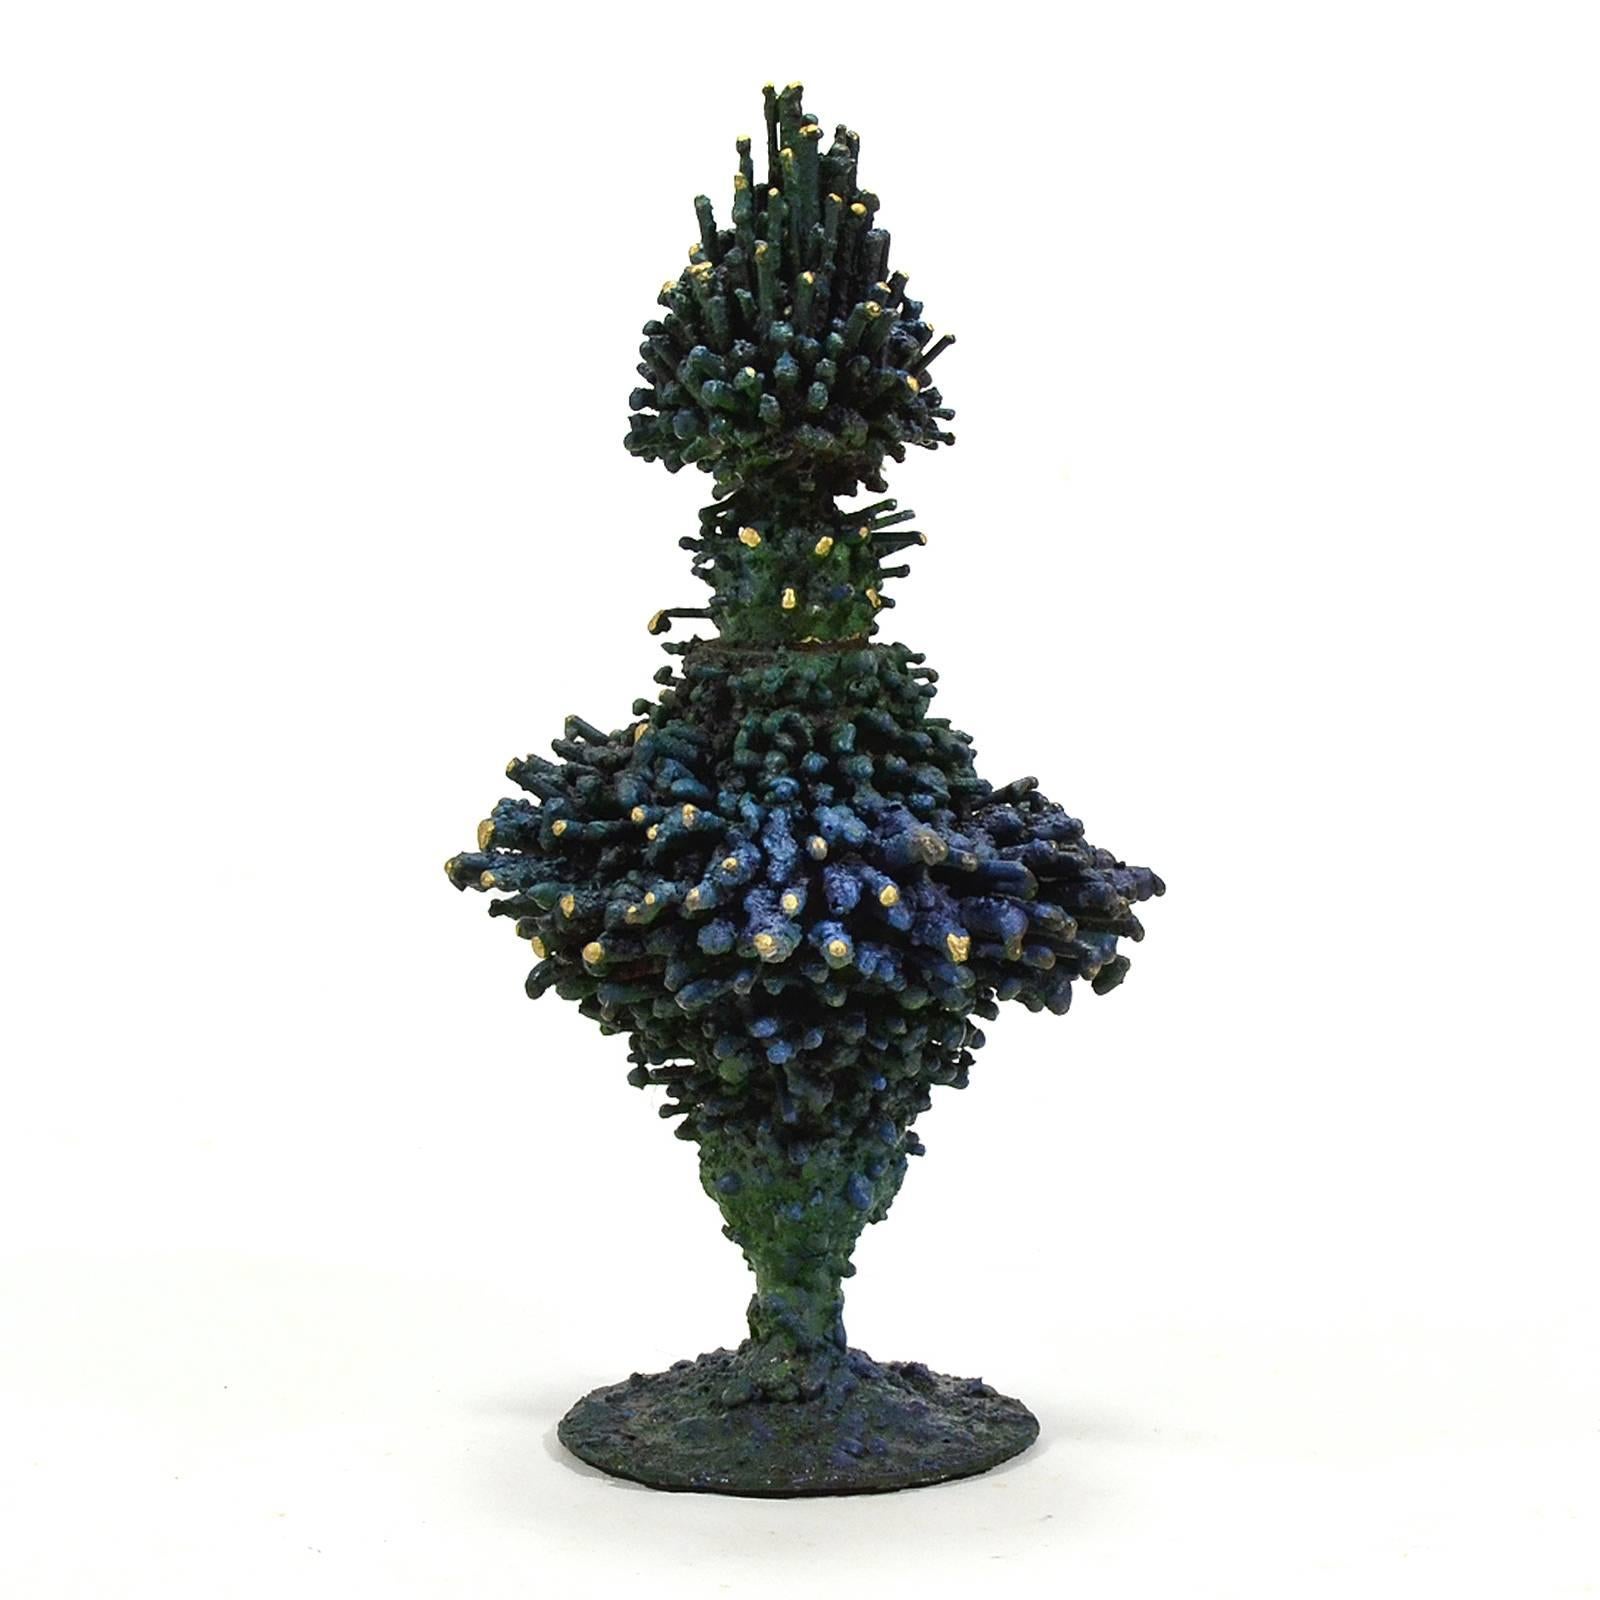 This sculpture by James Bearden has an intense visceral texture and doubles as a vessel with a removable top.